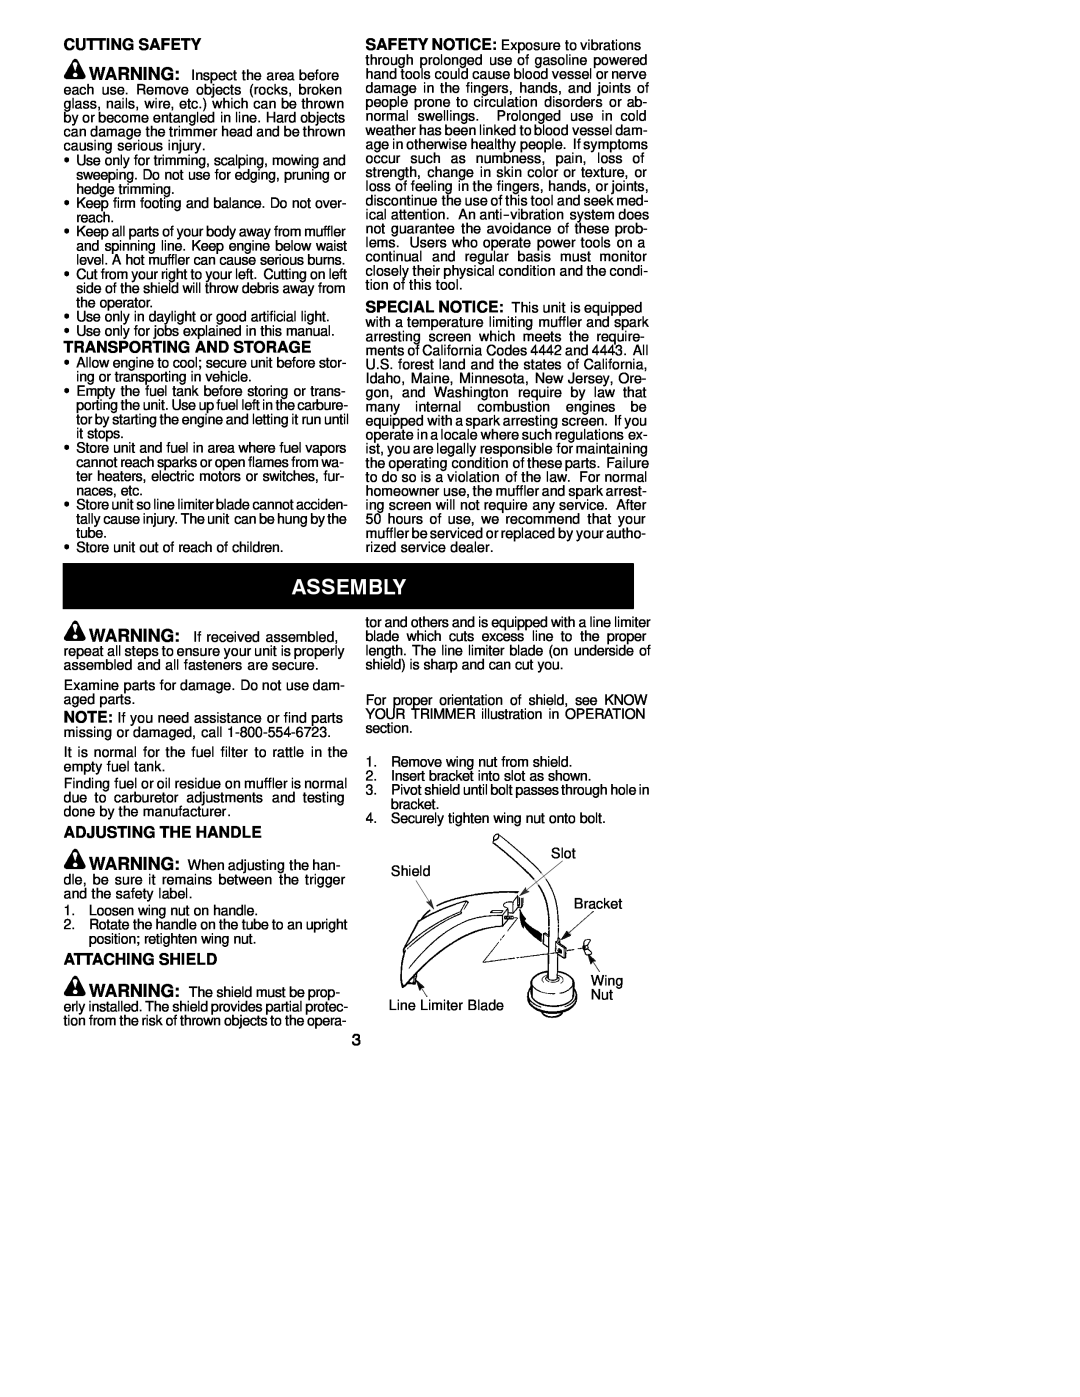 Weed Eater 530163439 instruction manual Cutting Safety, Transporting And Storage, Adjusting The Handle, Attaching Shield 